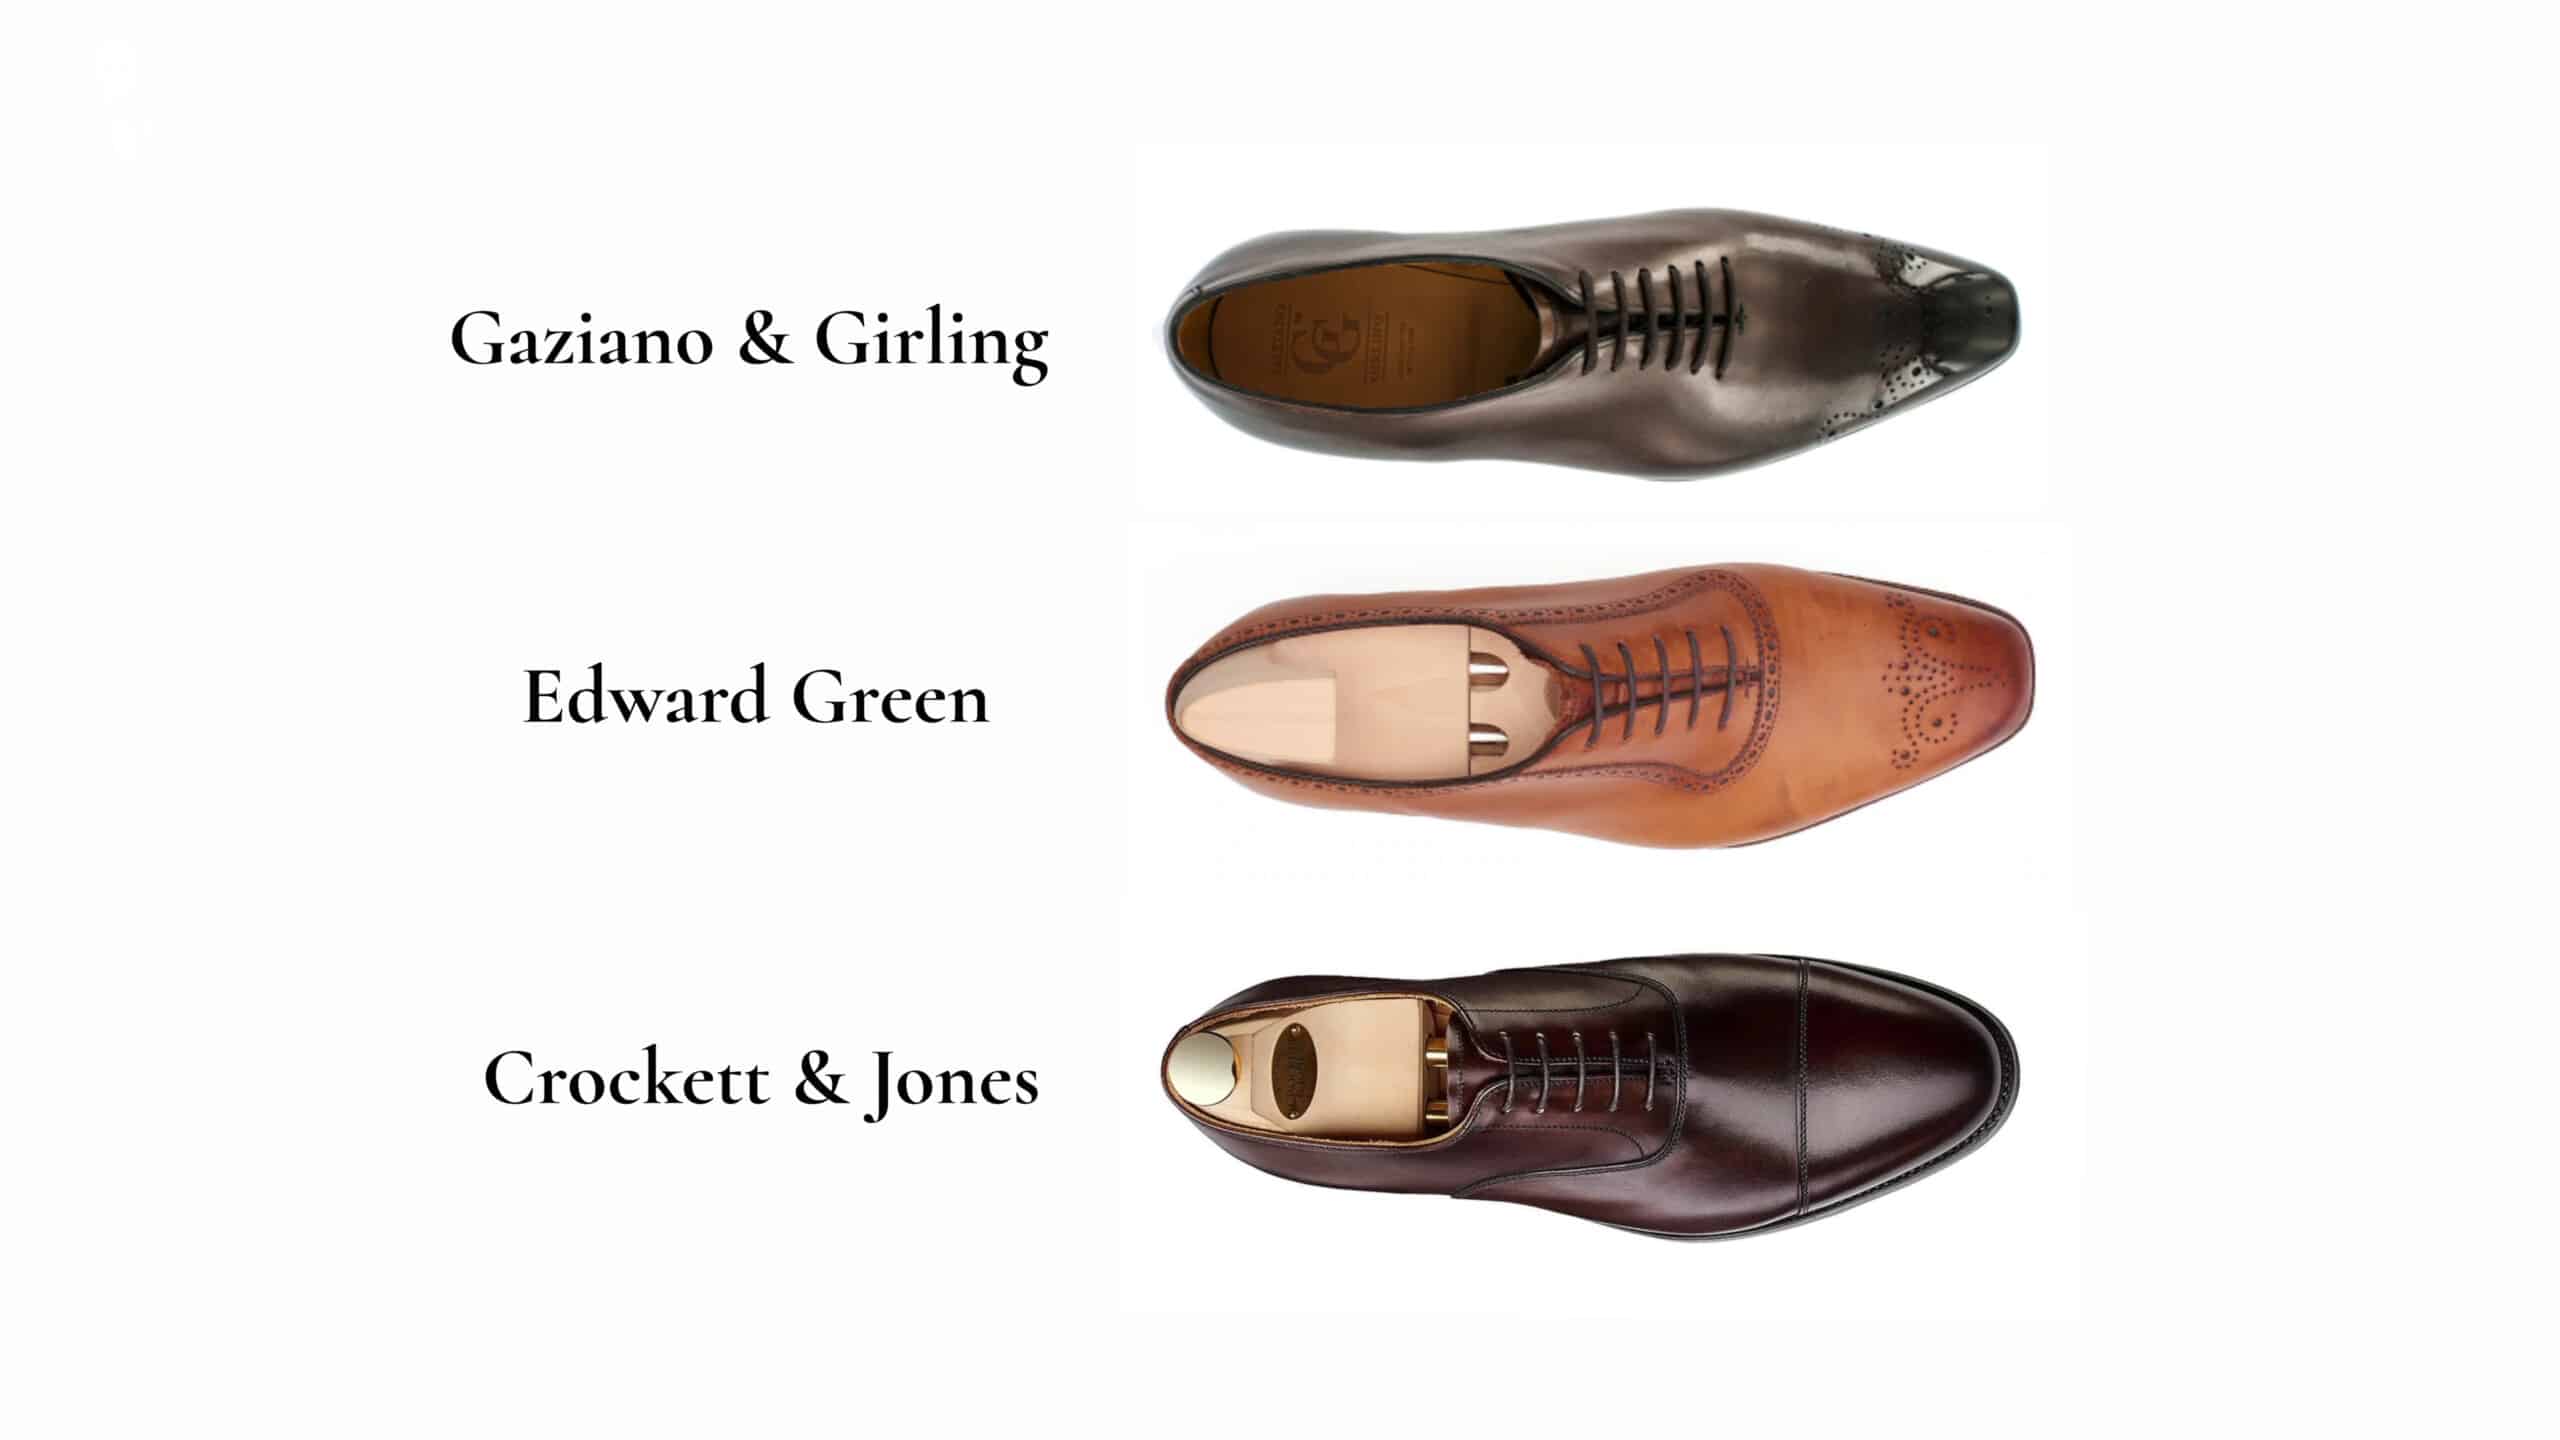 Are Edward Green Dress Shoes Worth It? (English Shoe Review ...